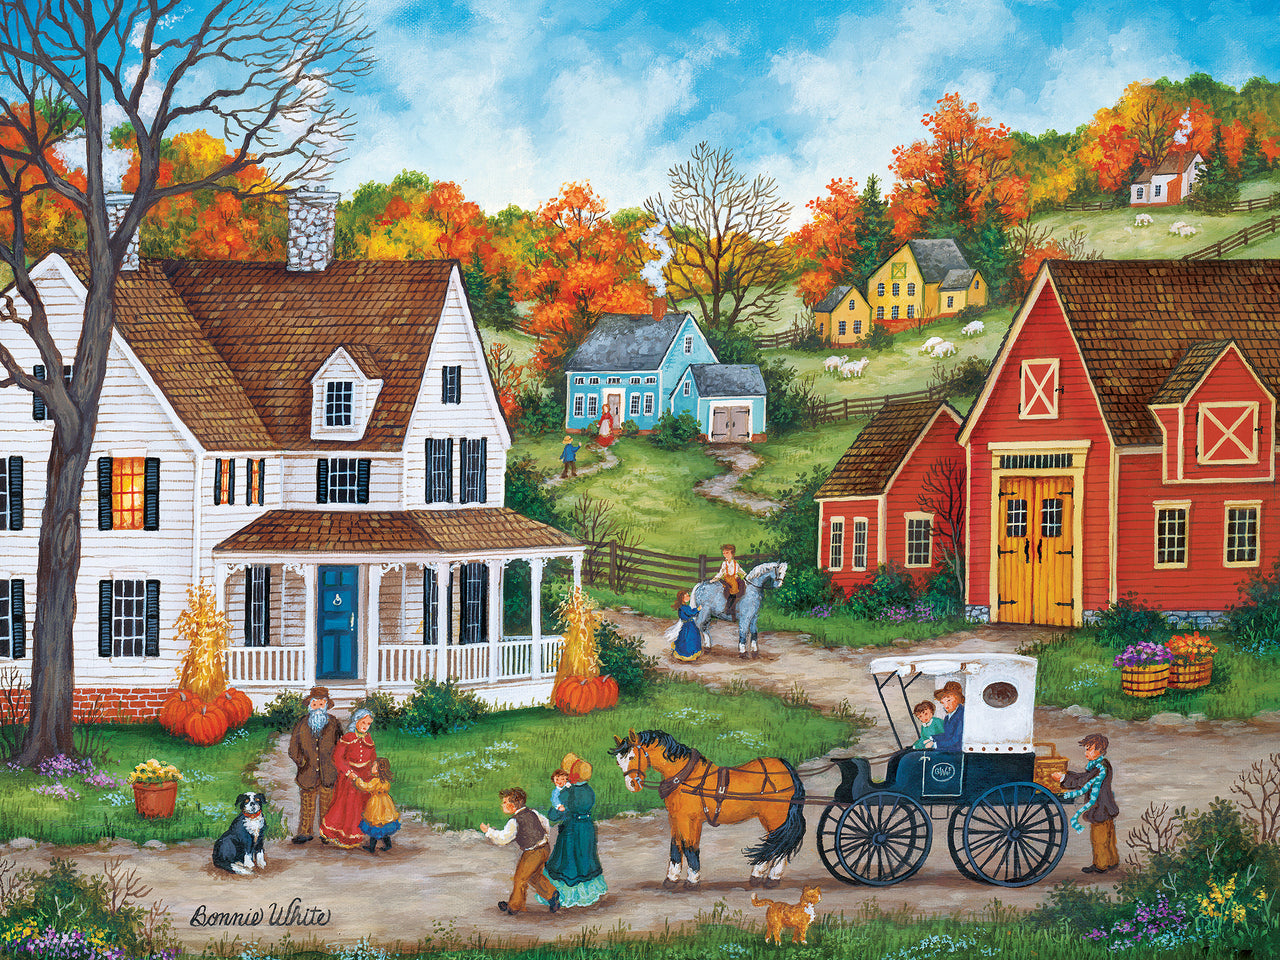 Heartland Collection - Dinner at Grandmas 550 Piece Jigsaw Puzzle by Masterpieces